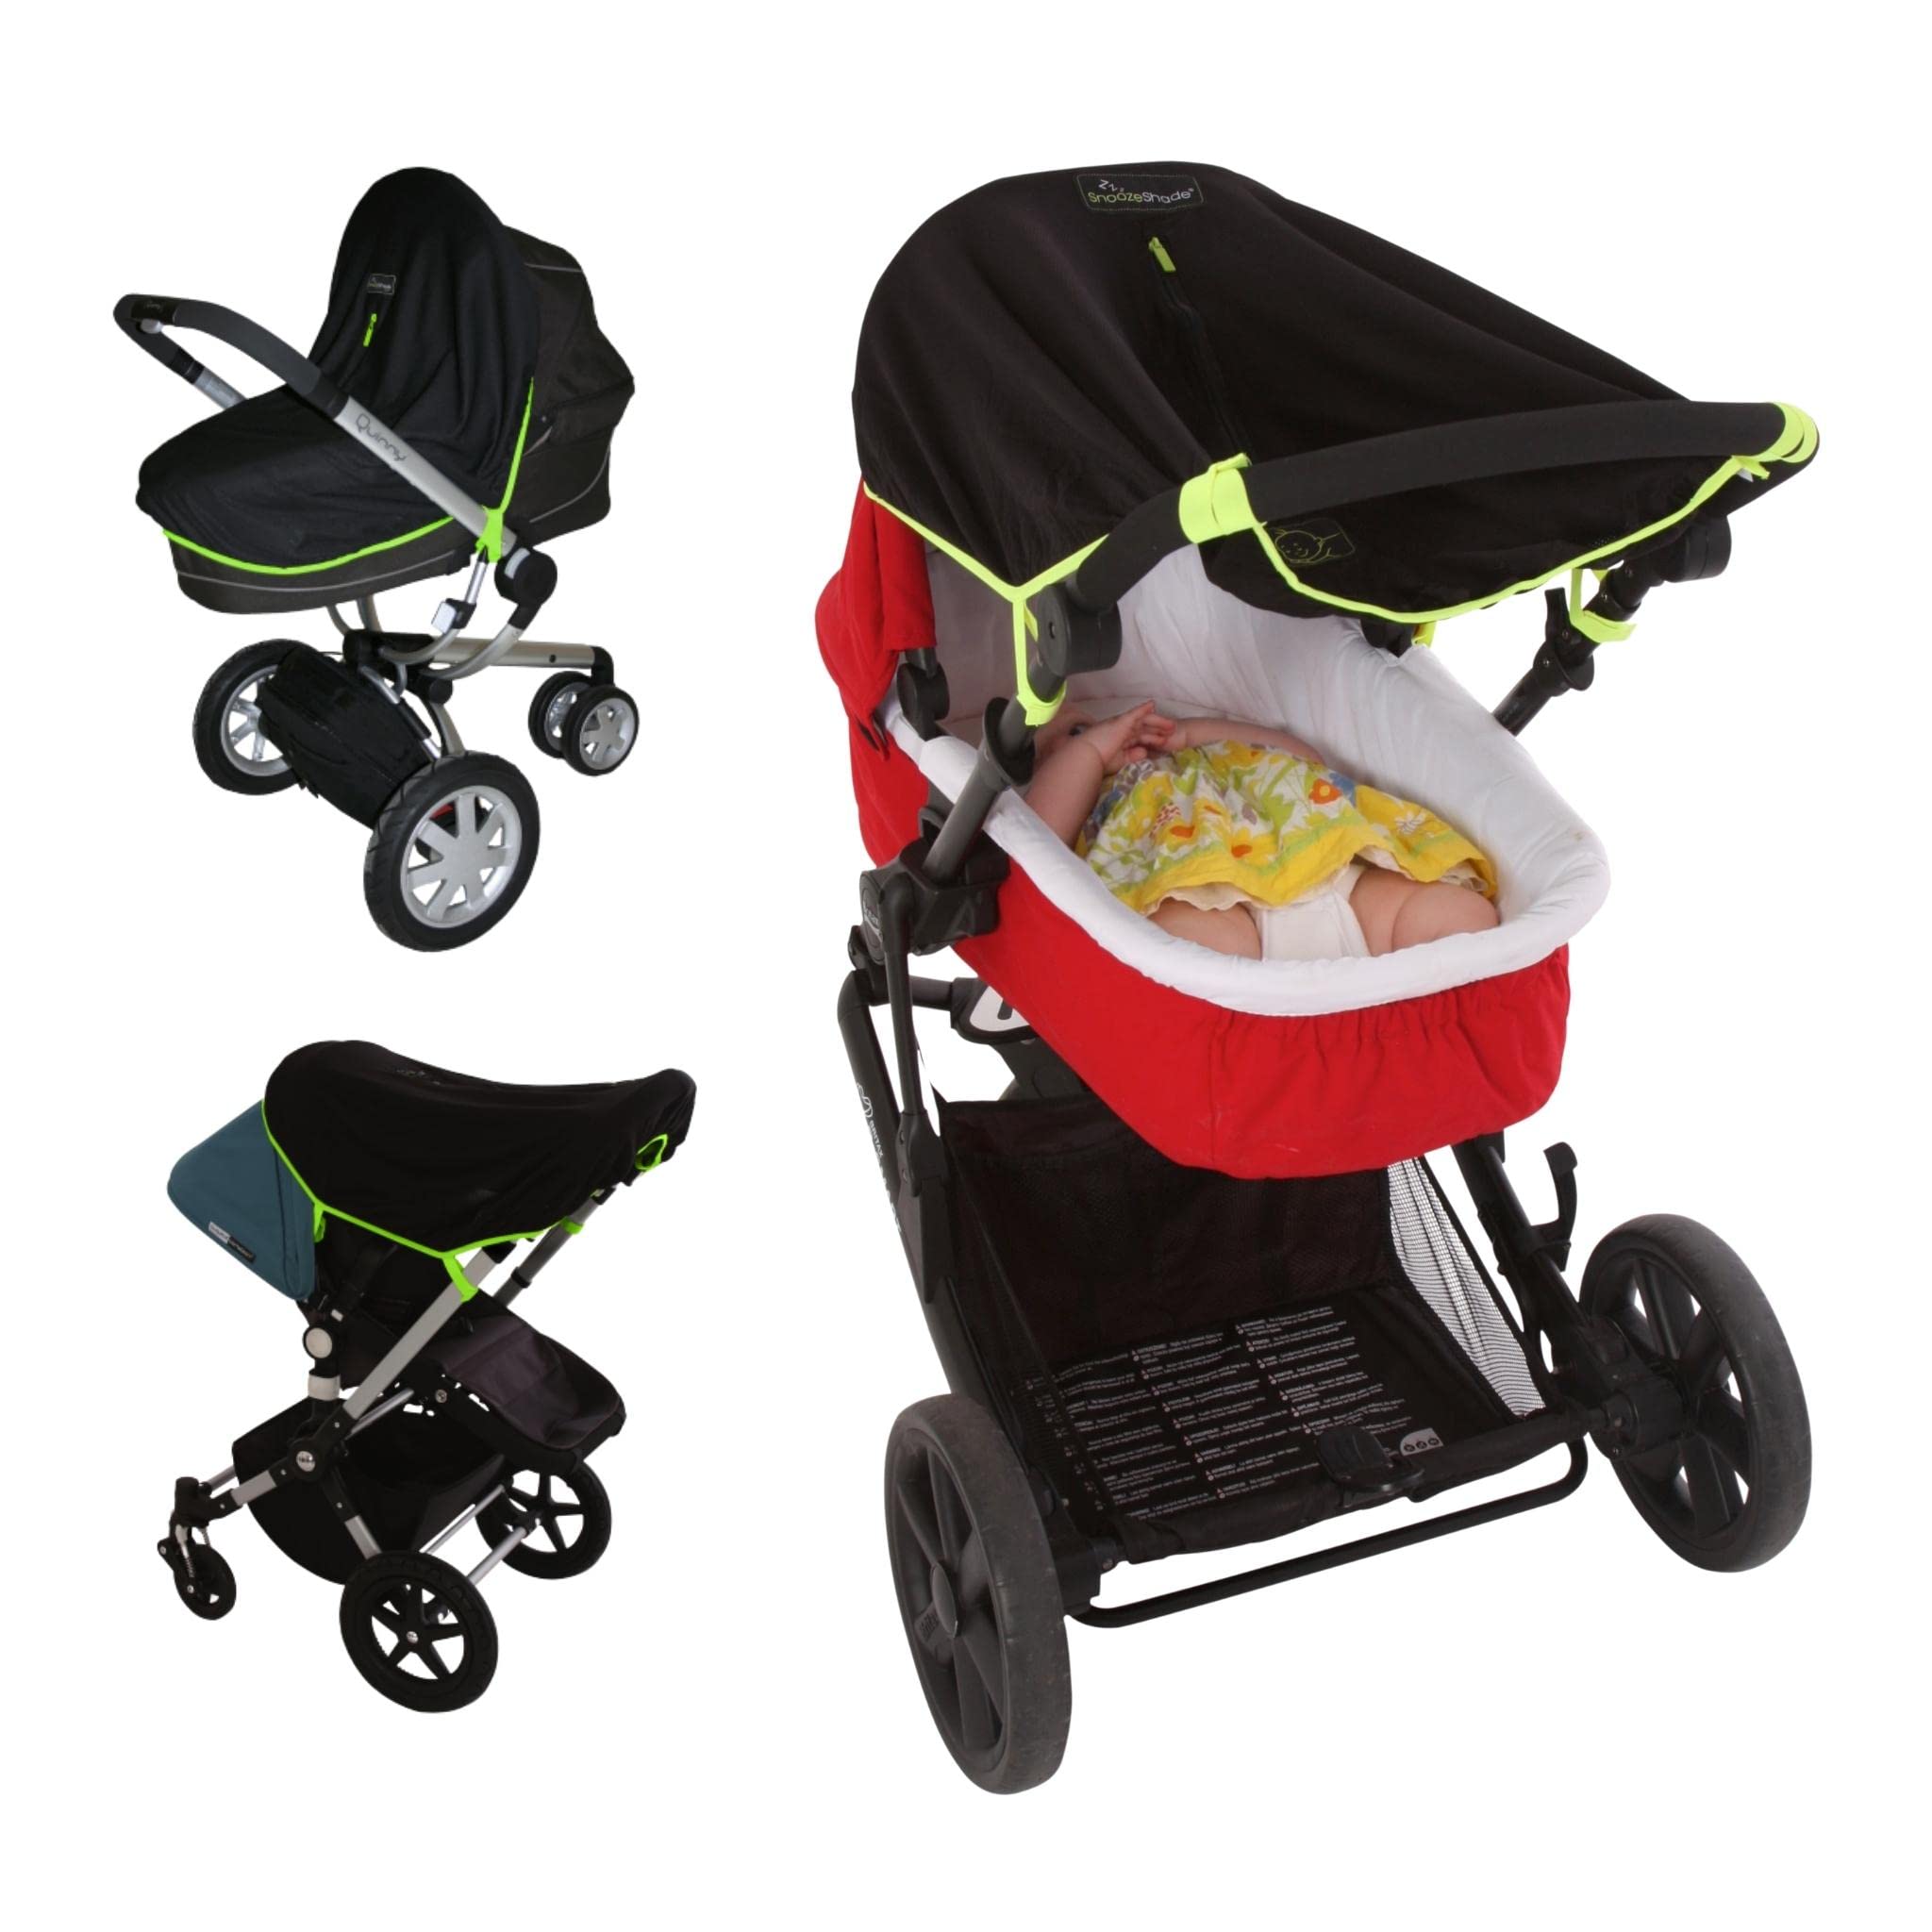 SnoozeShade Original (0-6m) | Universal fit pram and buggy sunshade | Blocks 99% UV | Blackout blind for pushchairs/carrycots | Best-selling safety green trim